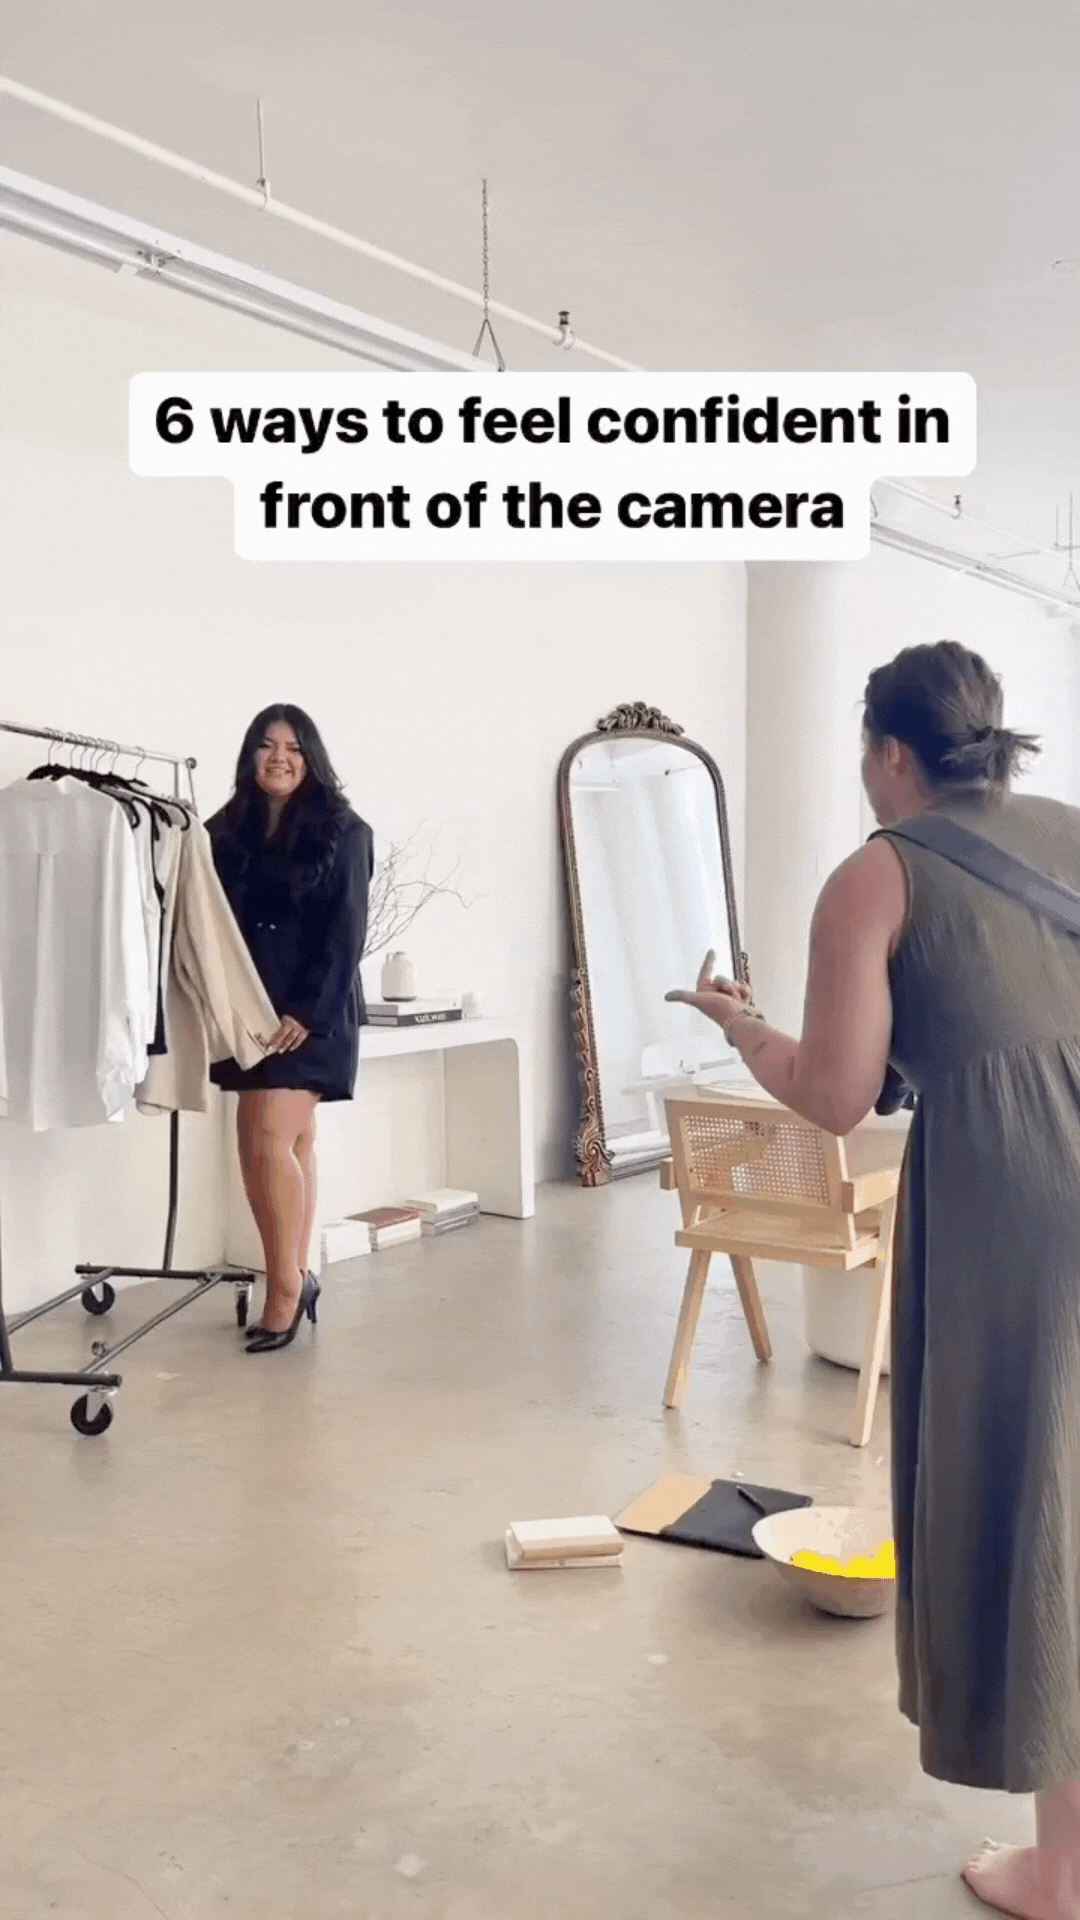 6 ways to feel confident in front of the camera